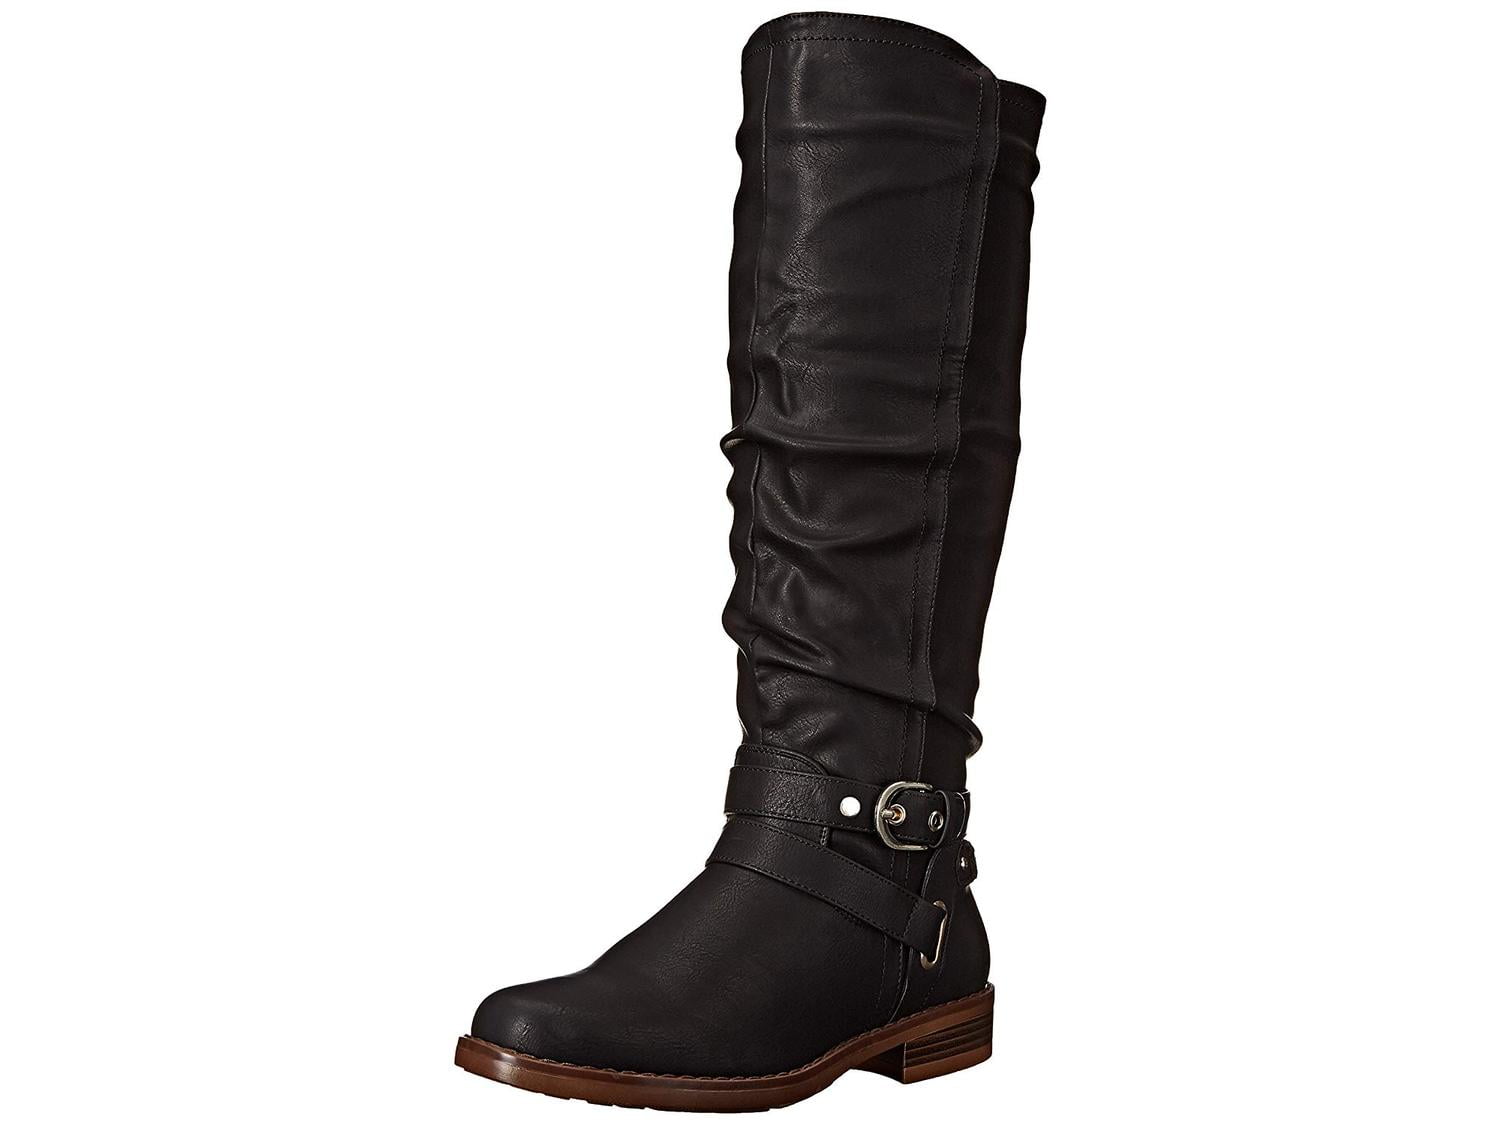 Martin Black Knee High Riding Wide Calf Boots Womens Buckle Shoes New Plus Size